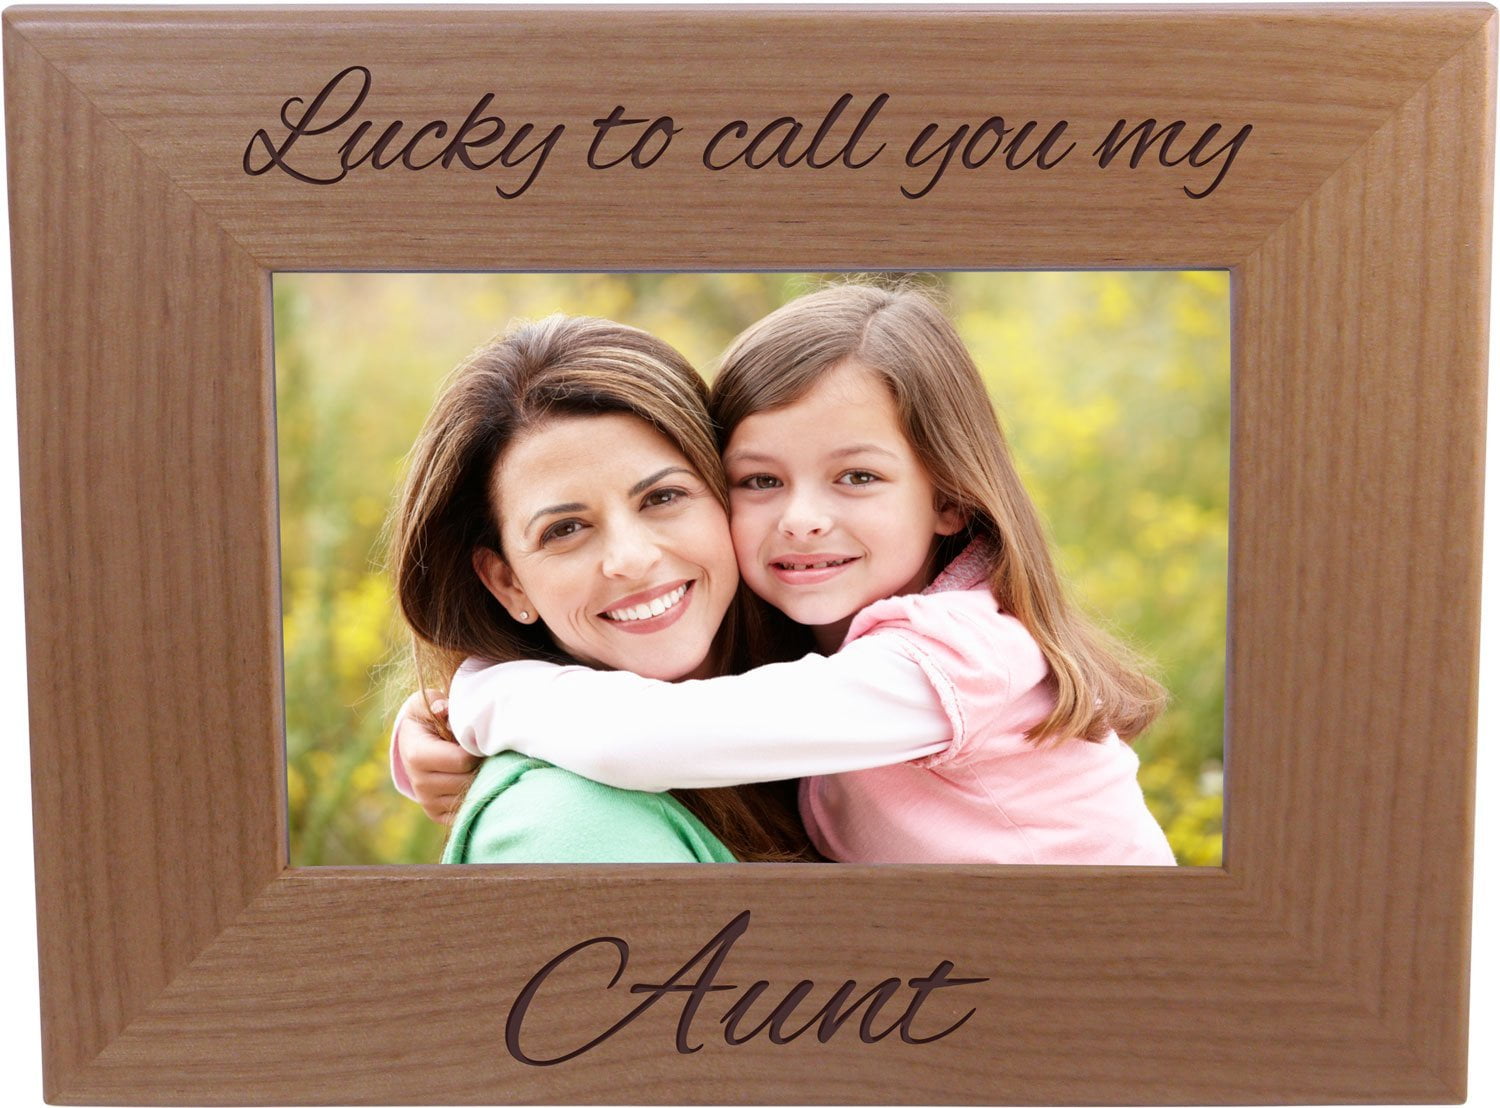 4x6 Inch Wood Picture Frame Custom World's Best Aunt Sisters Great Gift for Birthday for Sister Aunts